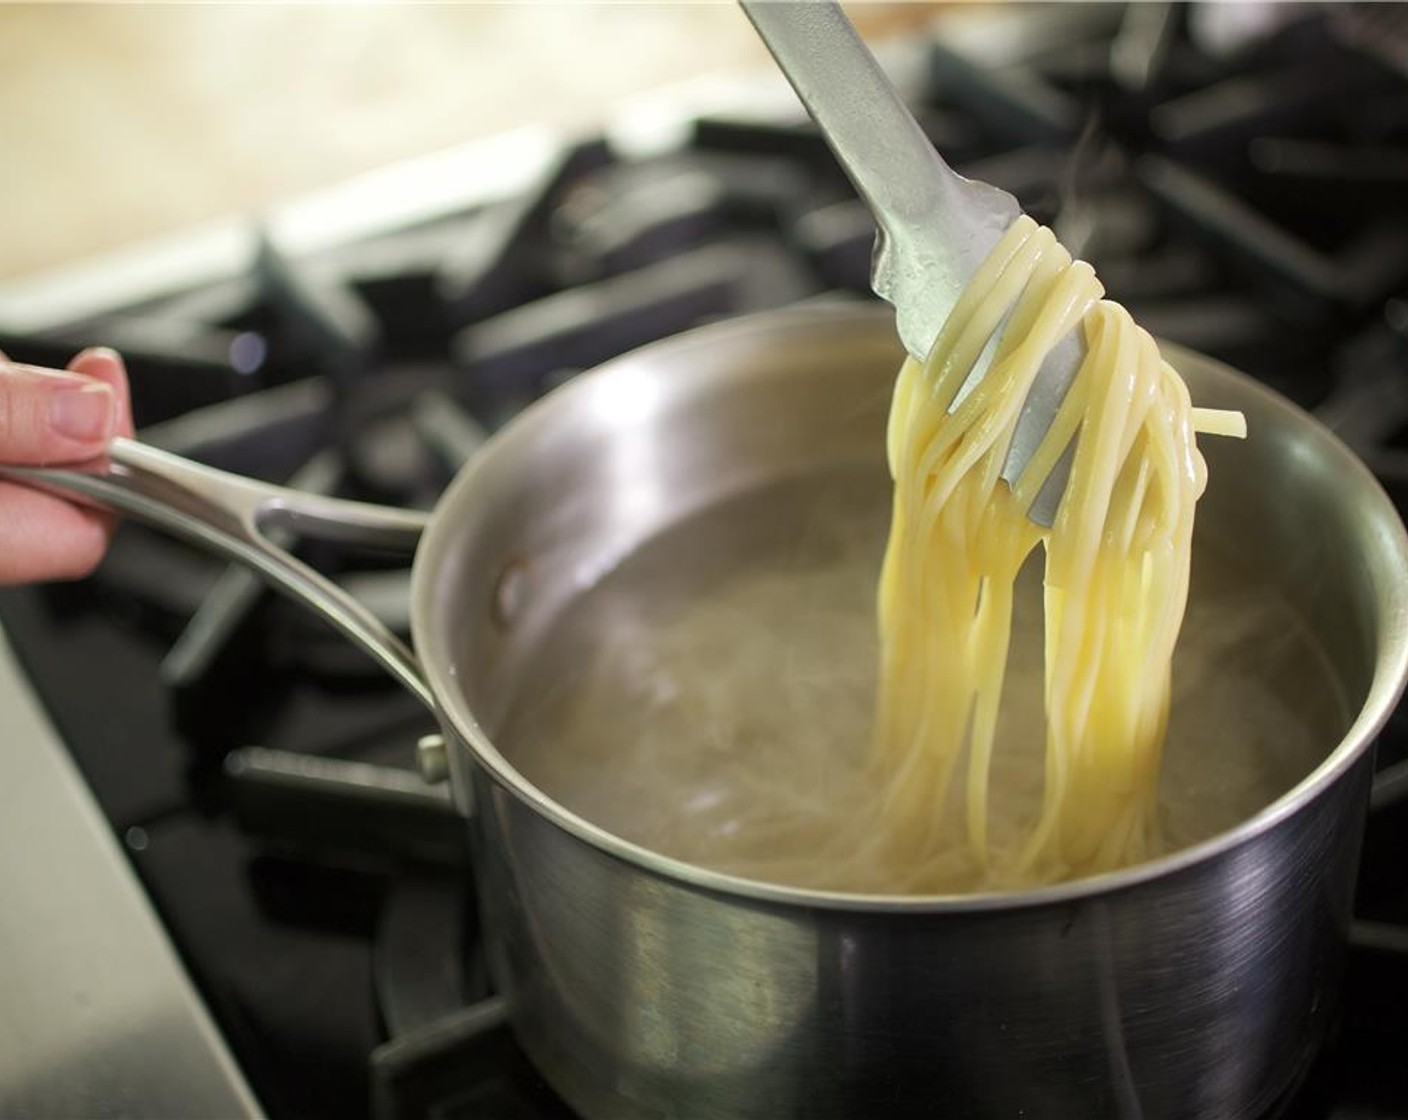 step 3 When water comes to a boil, add the Linguine (3 oz) and cook for 12 minutes. After two minutes of cooking, separate the noodles with tongs and repeat every three to four minutes to prevent the noodles from sticking. Drain into a colander and return to saucepan.